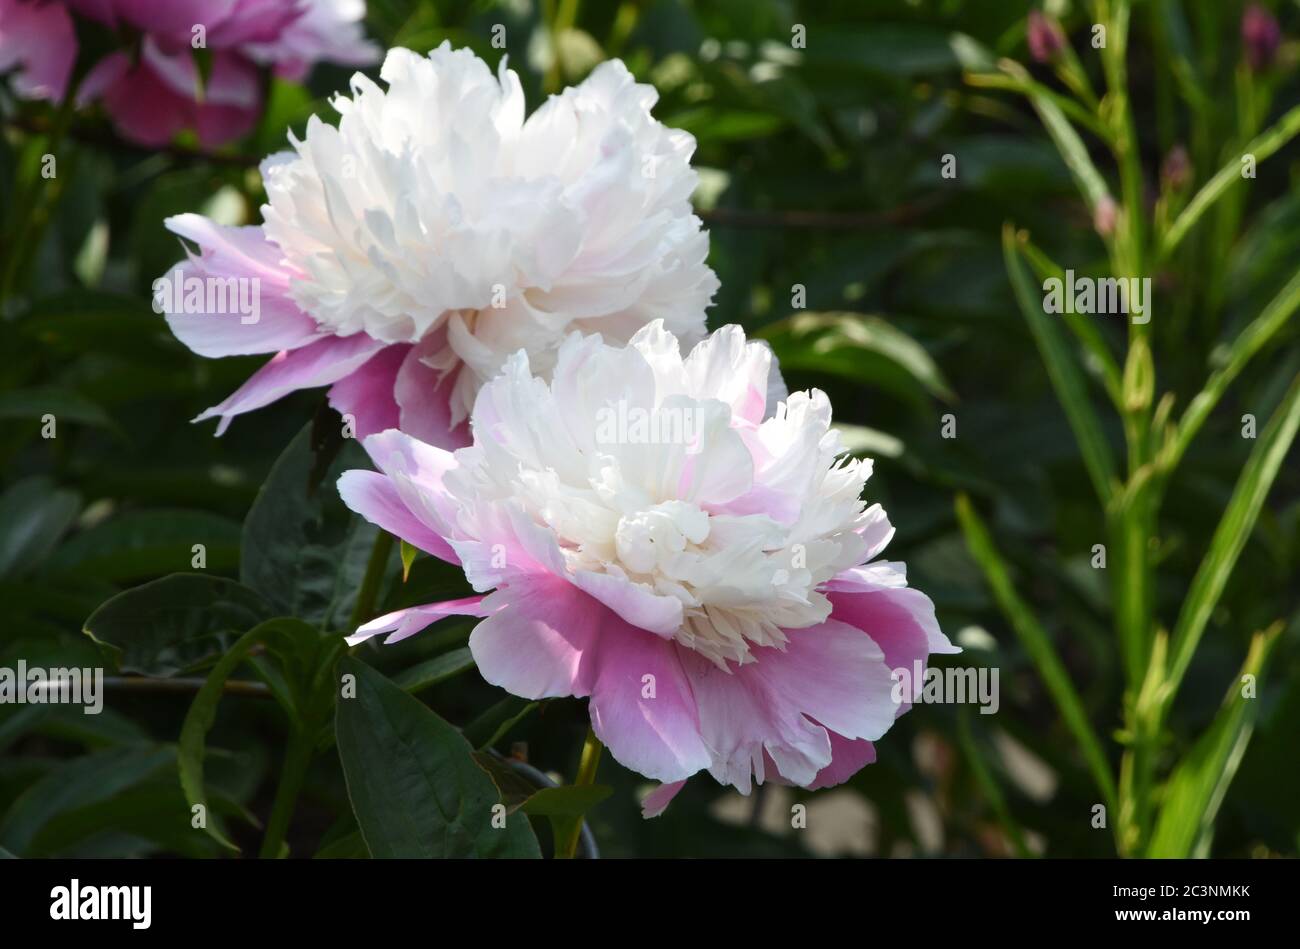 Pretty two tone white and pink peony flowers blooming. Stock Photo